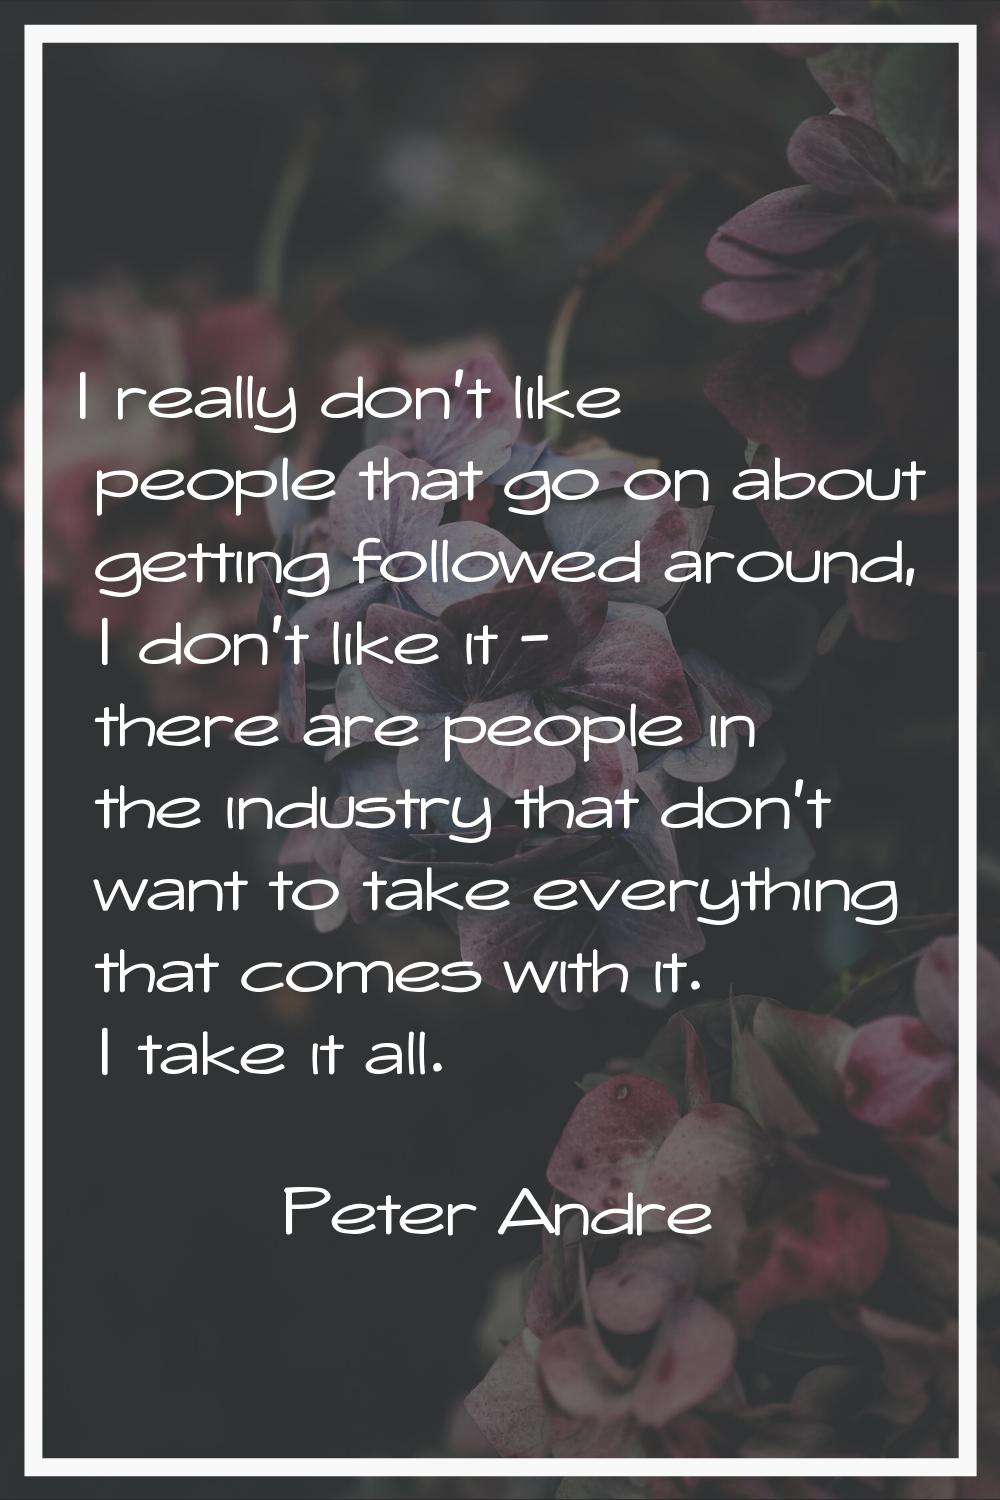 I really don't like people that go on about getting followed around, I don't like it - there are pe